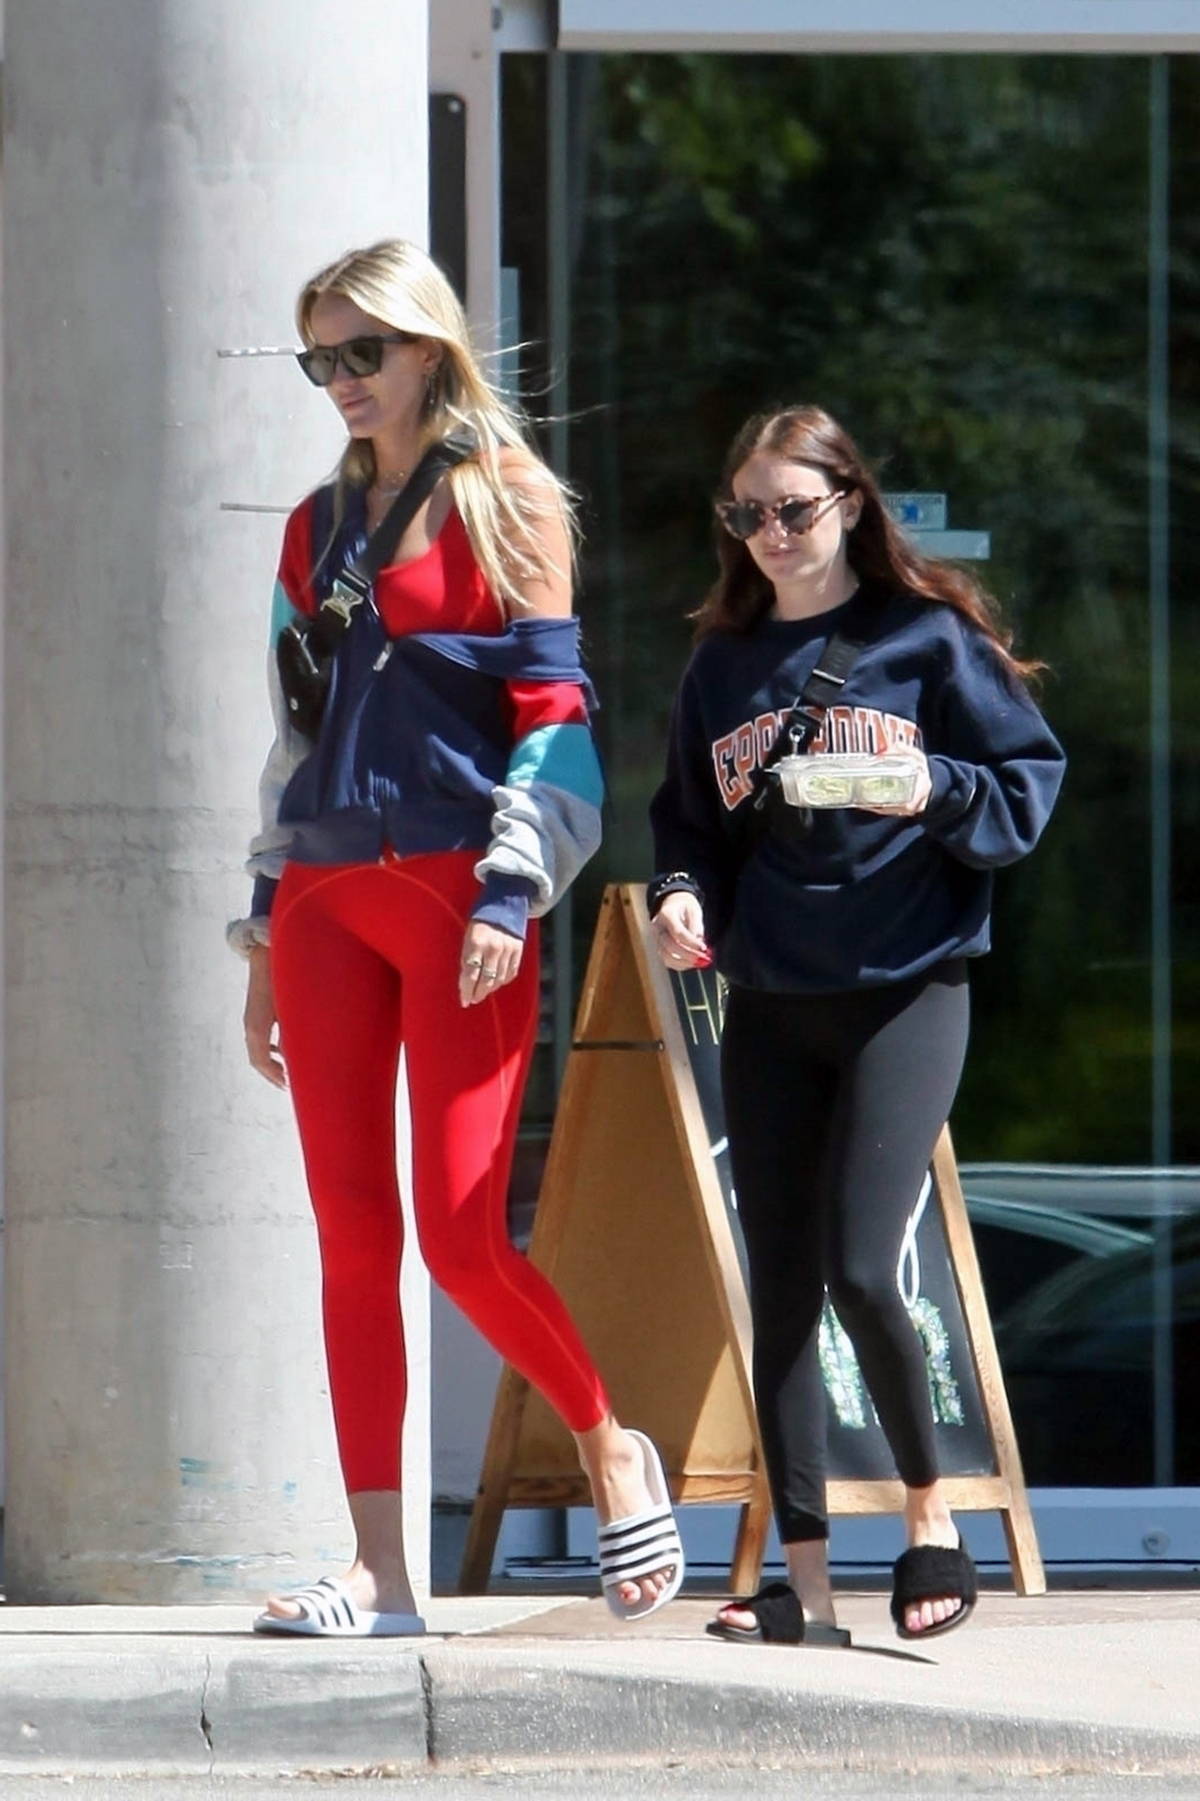 ava phillippe looks great in a red sports bra and leggings while